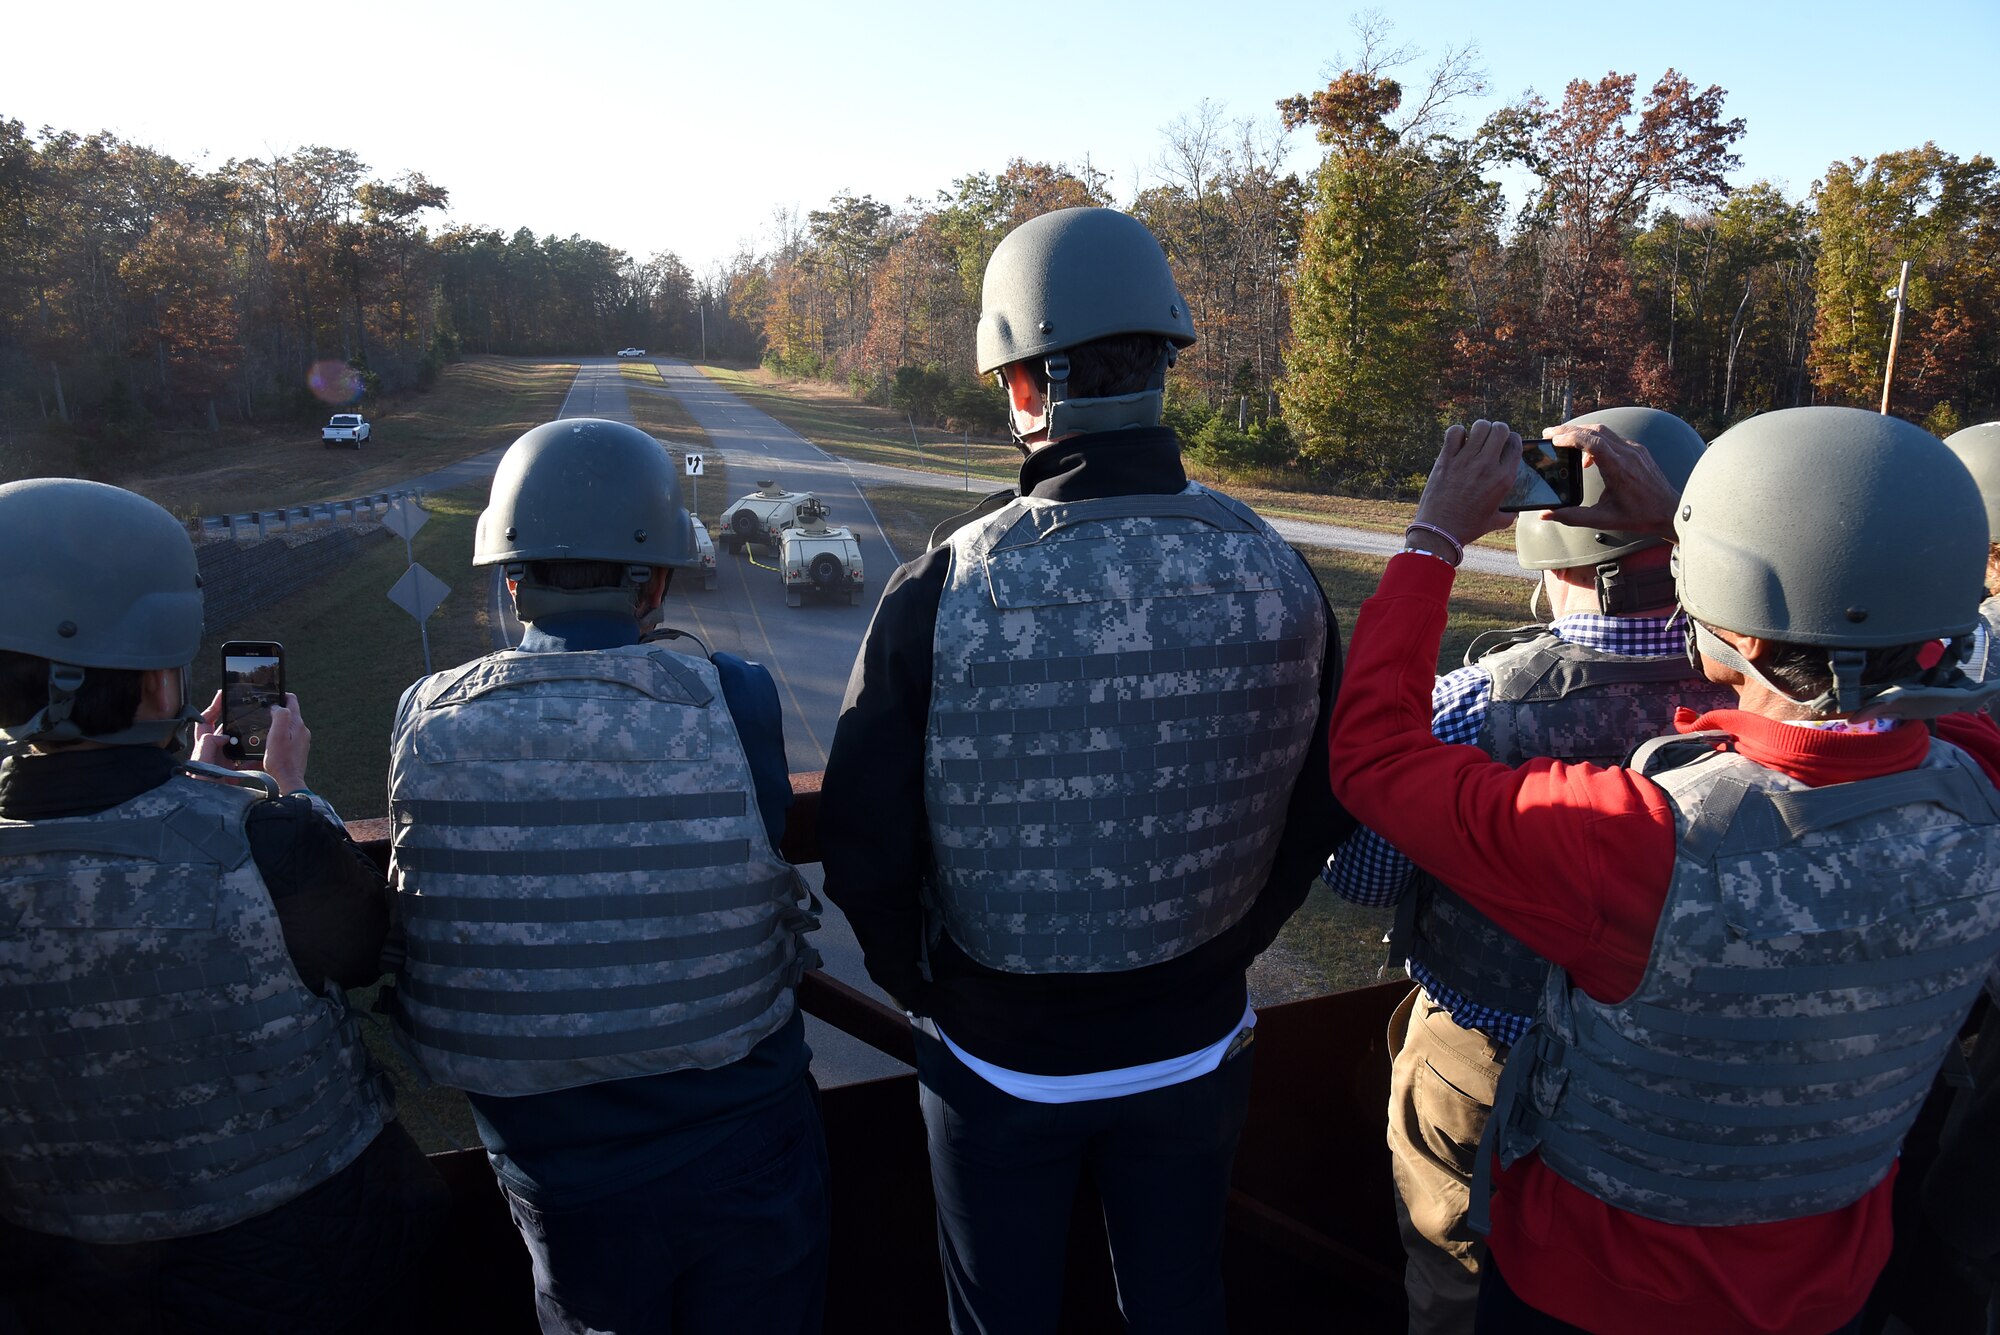 Air Mobility Command civic leaders watch asthe 421st Combat Training Squadron put on a mounted operations demonstration at Home Station Training Lane West during their tour of the U.S. Air Force Expeditionary Operations School (EOS) in the U.S. Air Force Expeditionary Center, Nov. 6, 2019, at Joint Base McGuire-Dix- Lakehurst, New Jersey. The AMC civic leaders toured the EOS to see the training they provide and how they better prepare Airmen for deployments. (U.S. Air Force photo by Tech. Sgt. Ashley Hyatt)